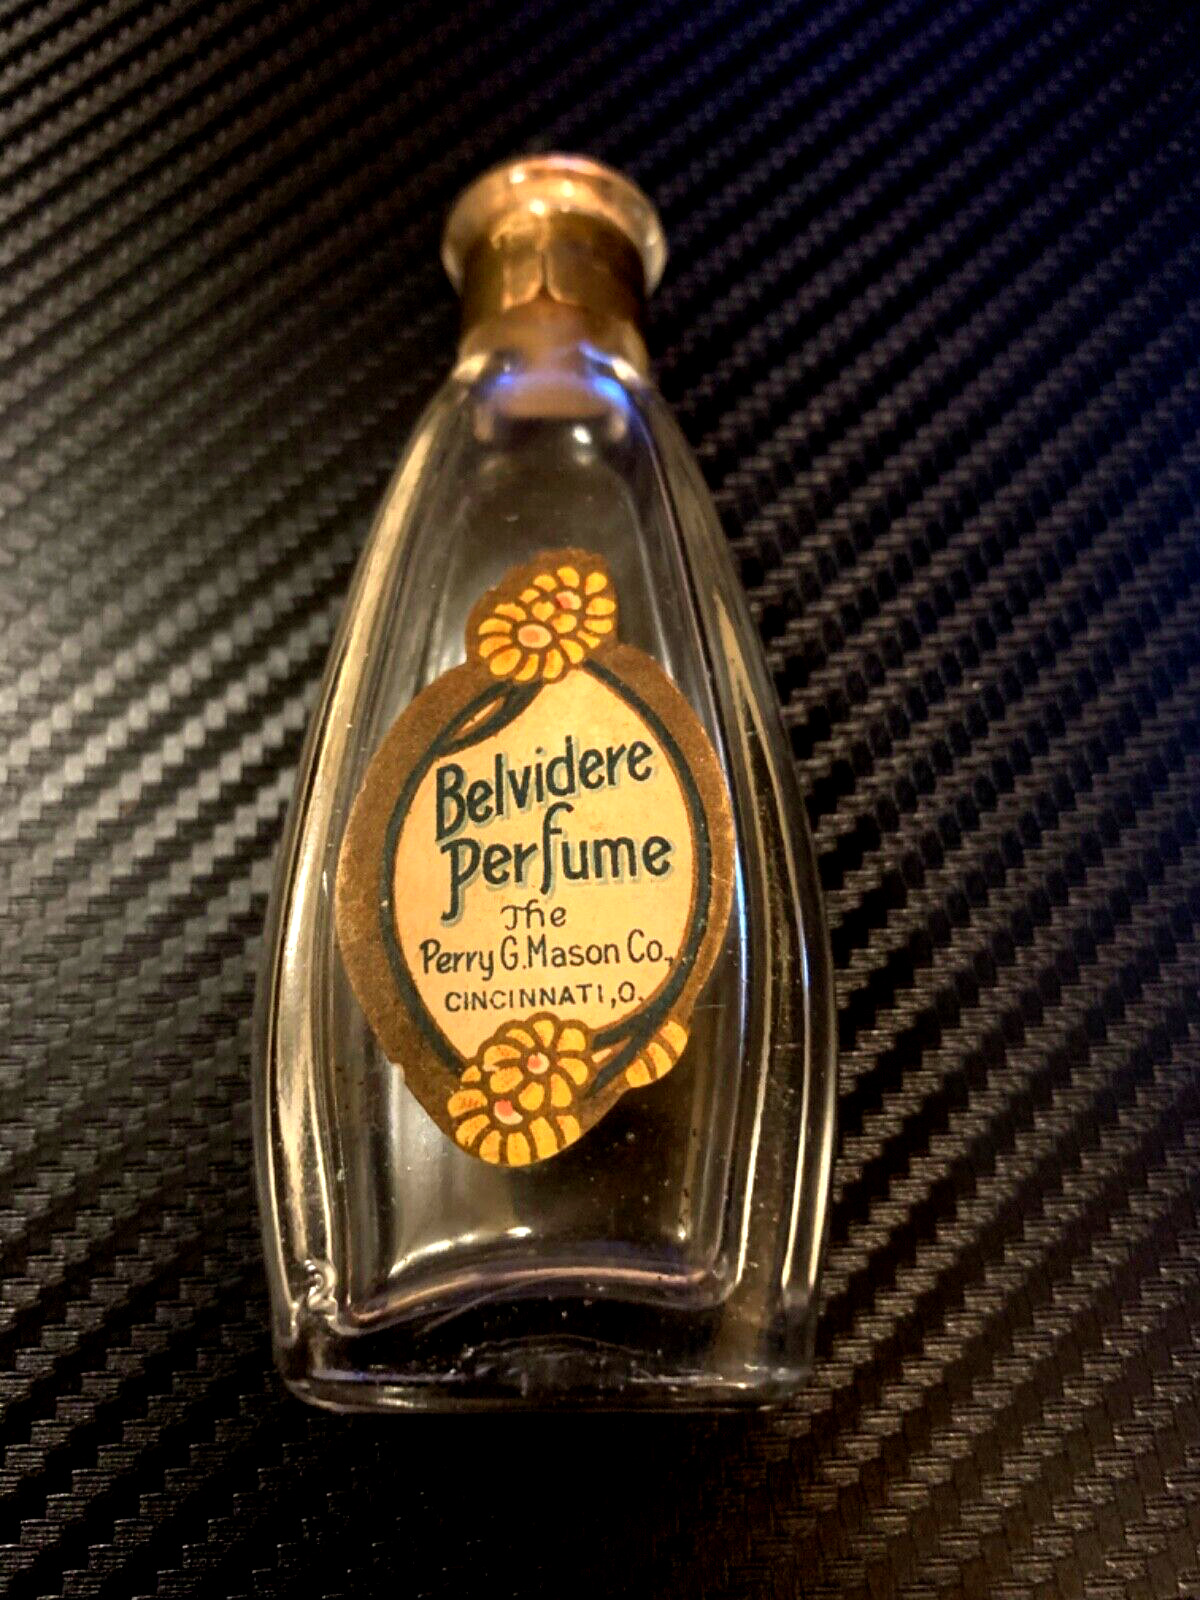 Lovely   Antique perfume bottle.  Belvidere by Perry G. Mason & Co.  1920s.